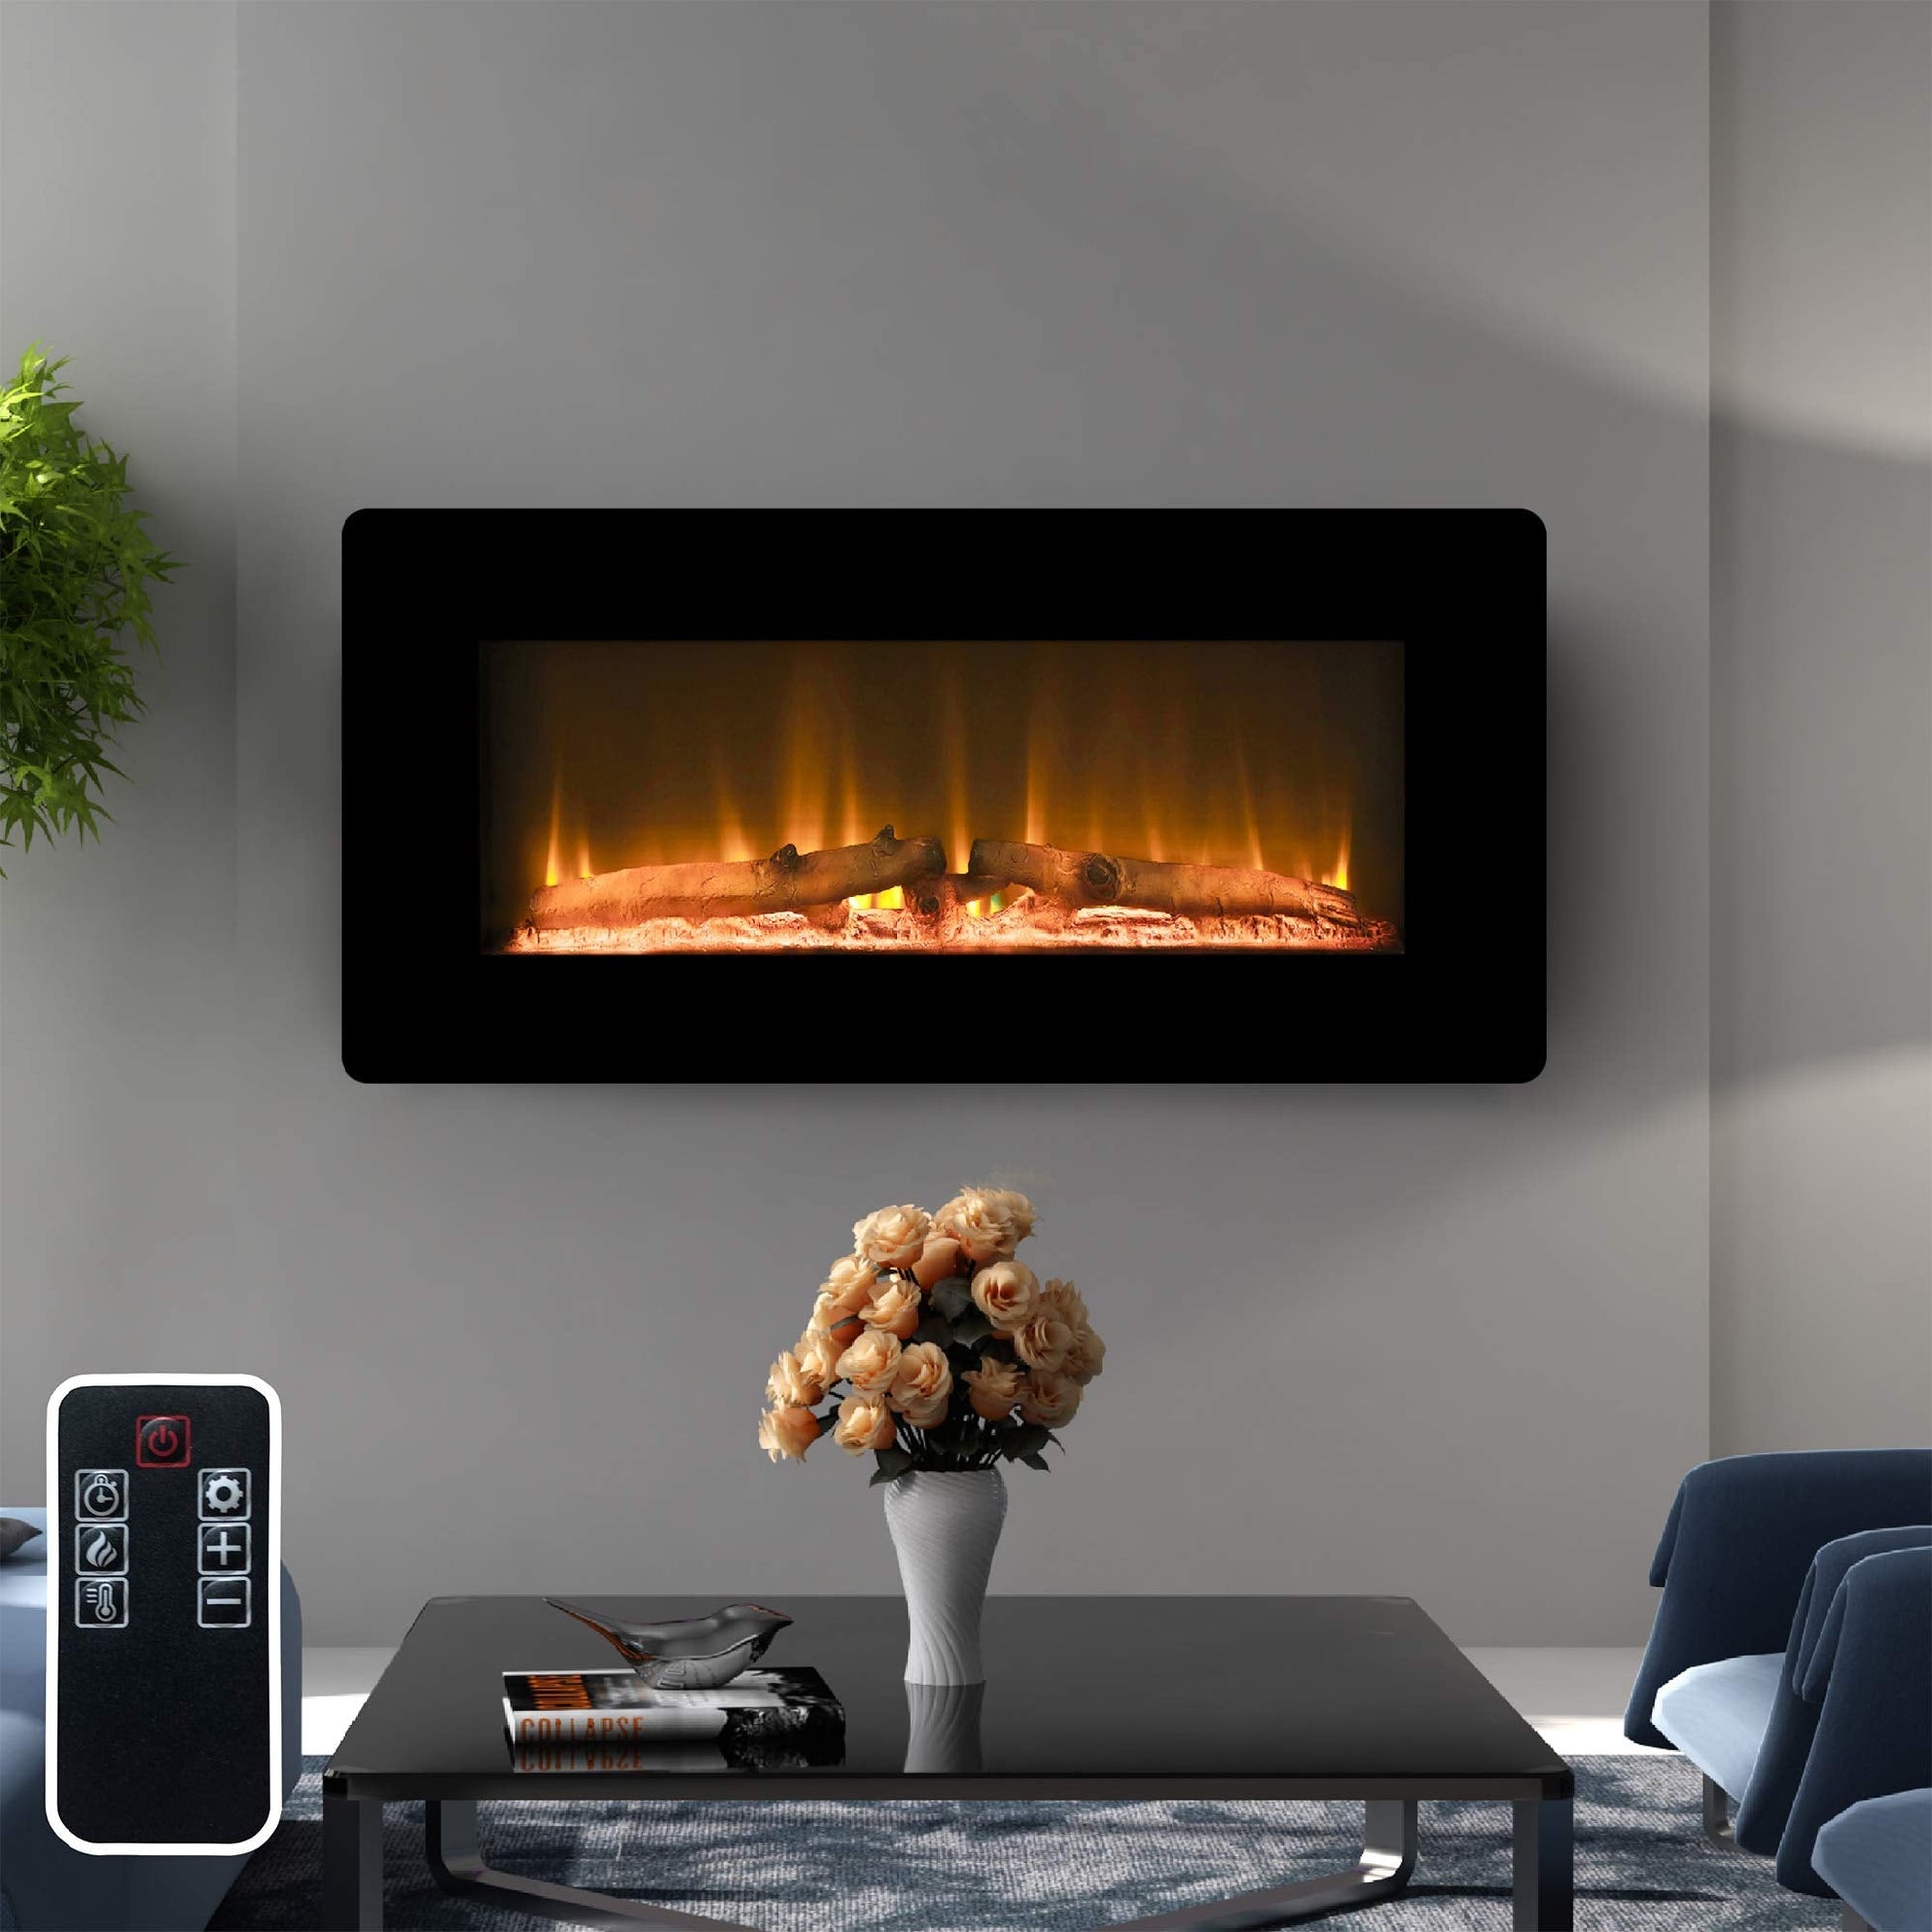 LOKATSE HOME 36" 1400W Wall Mounted Electric Fireplace Stove Heater with Realistic Logs Flame Brightness Timer Thermostat Adjustable Manual&Remote Control (36 inch 3-Level) - Home Decor Gifts and More